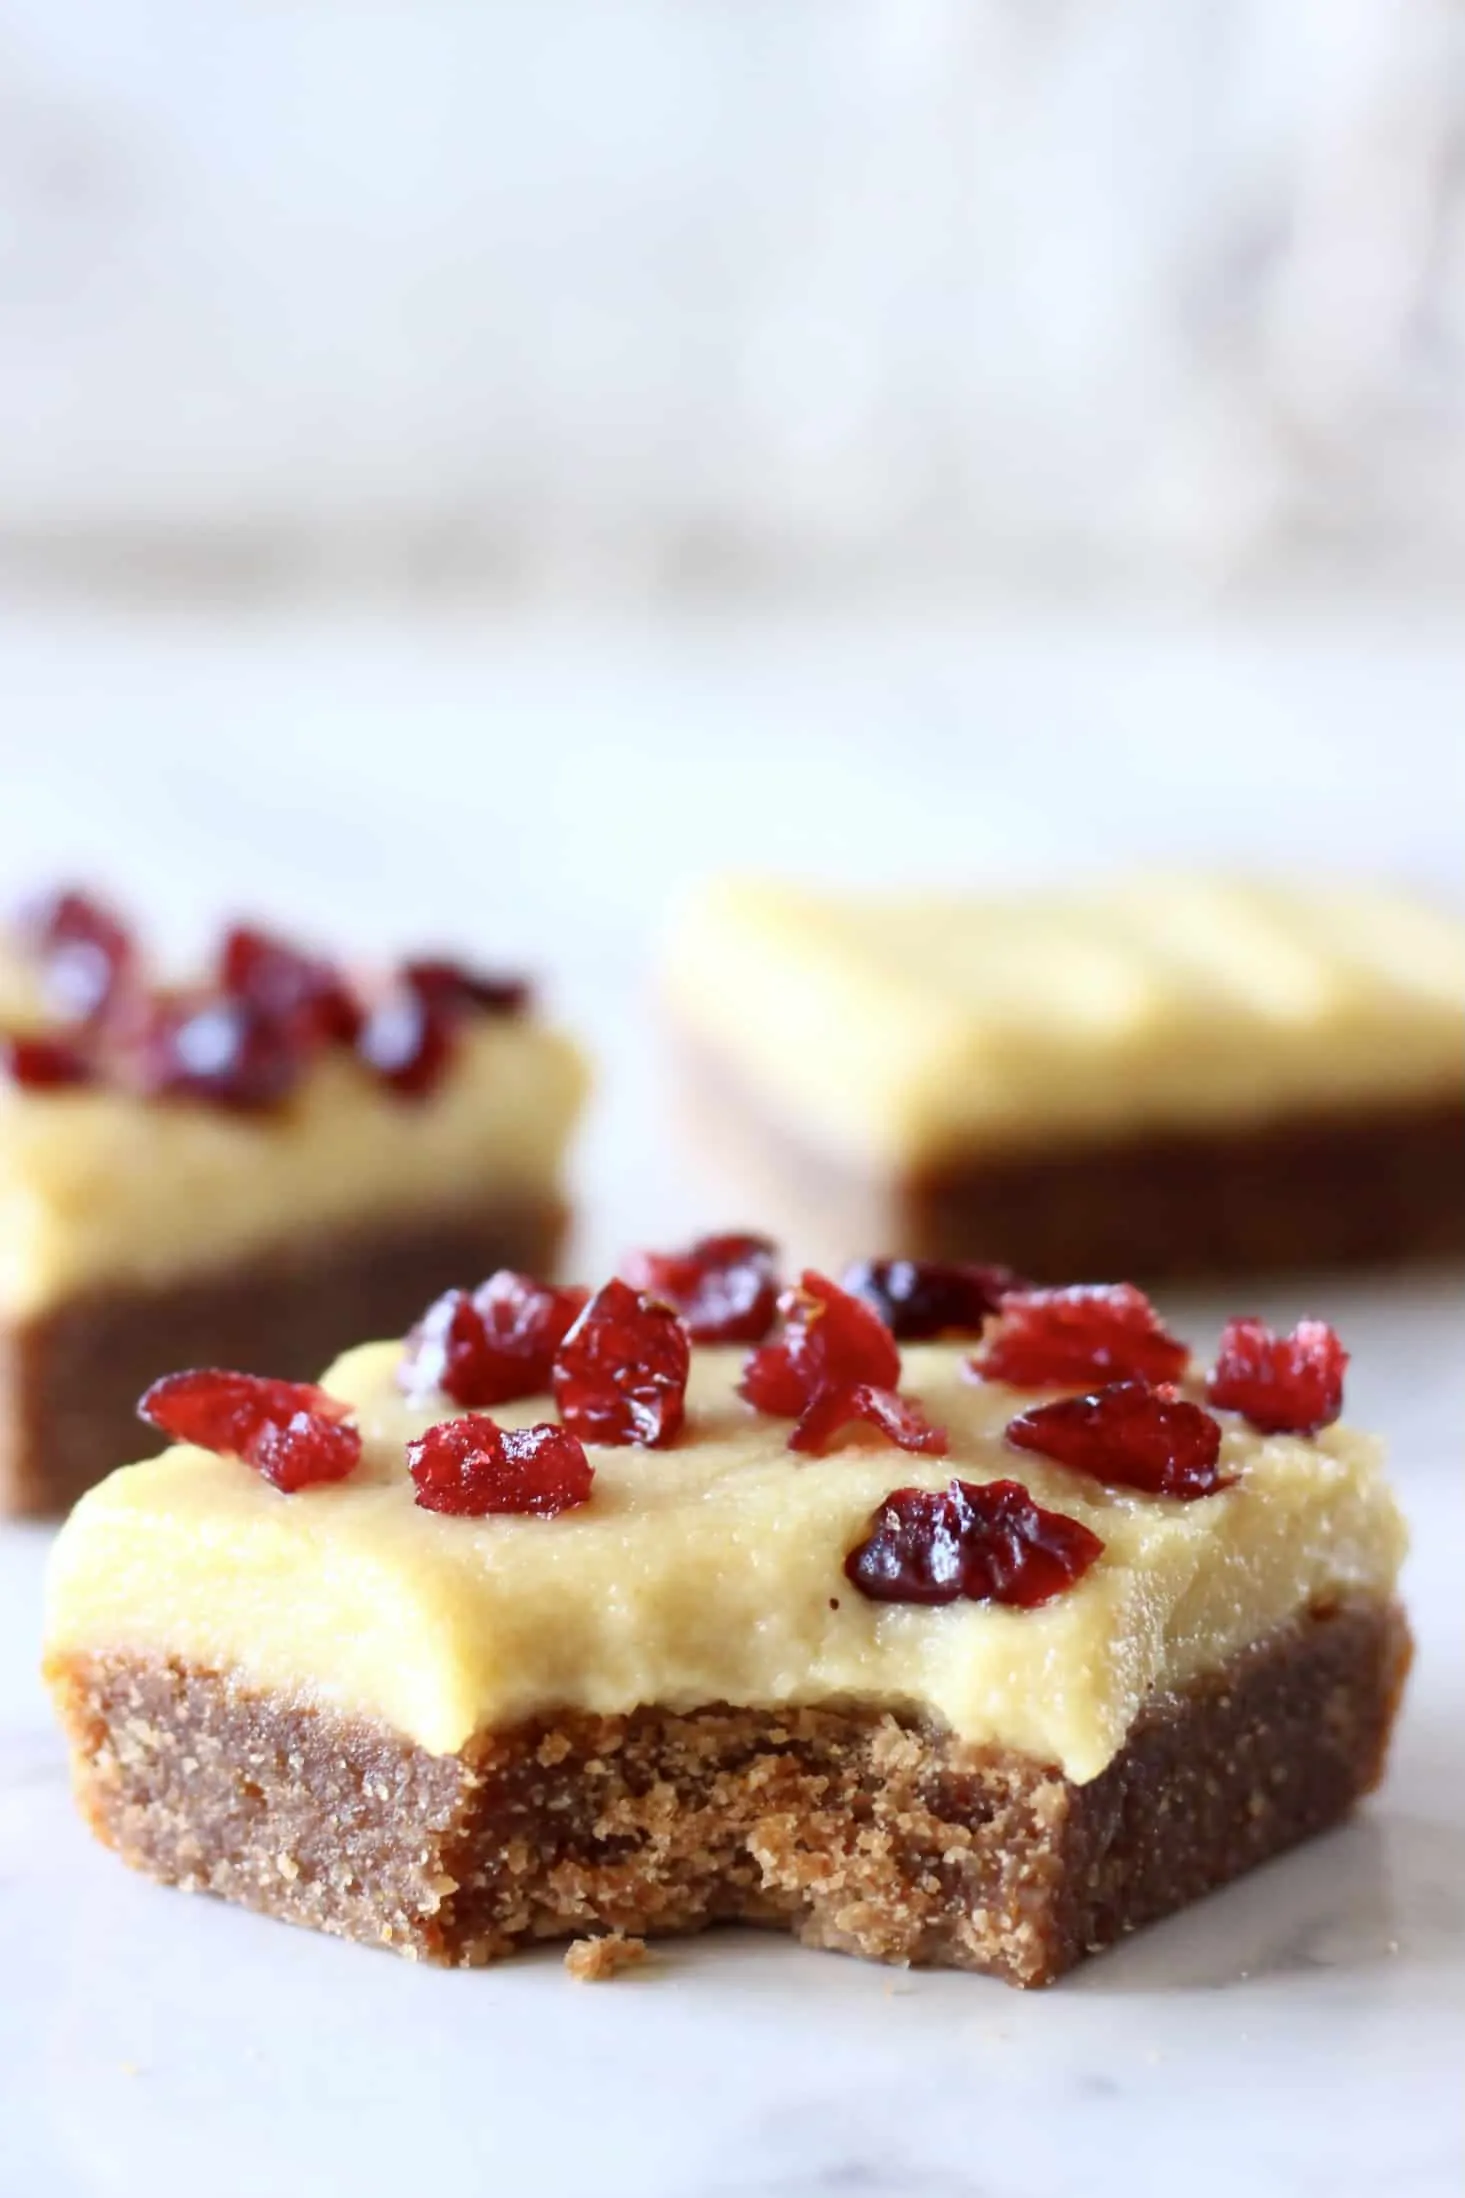 Three gingerbread cookie bars with frosting and dried cranberries with a bite taken out of one